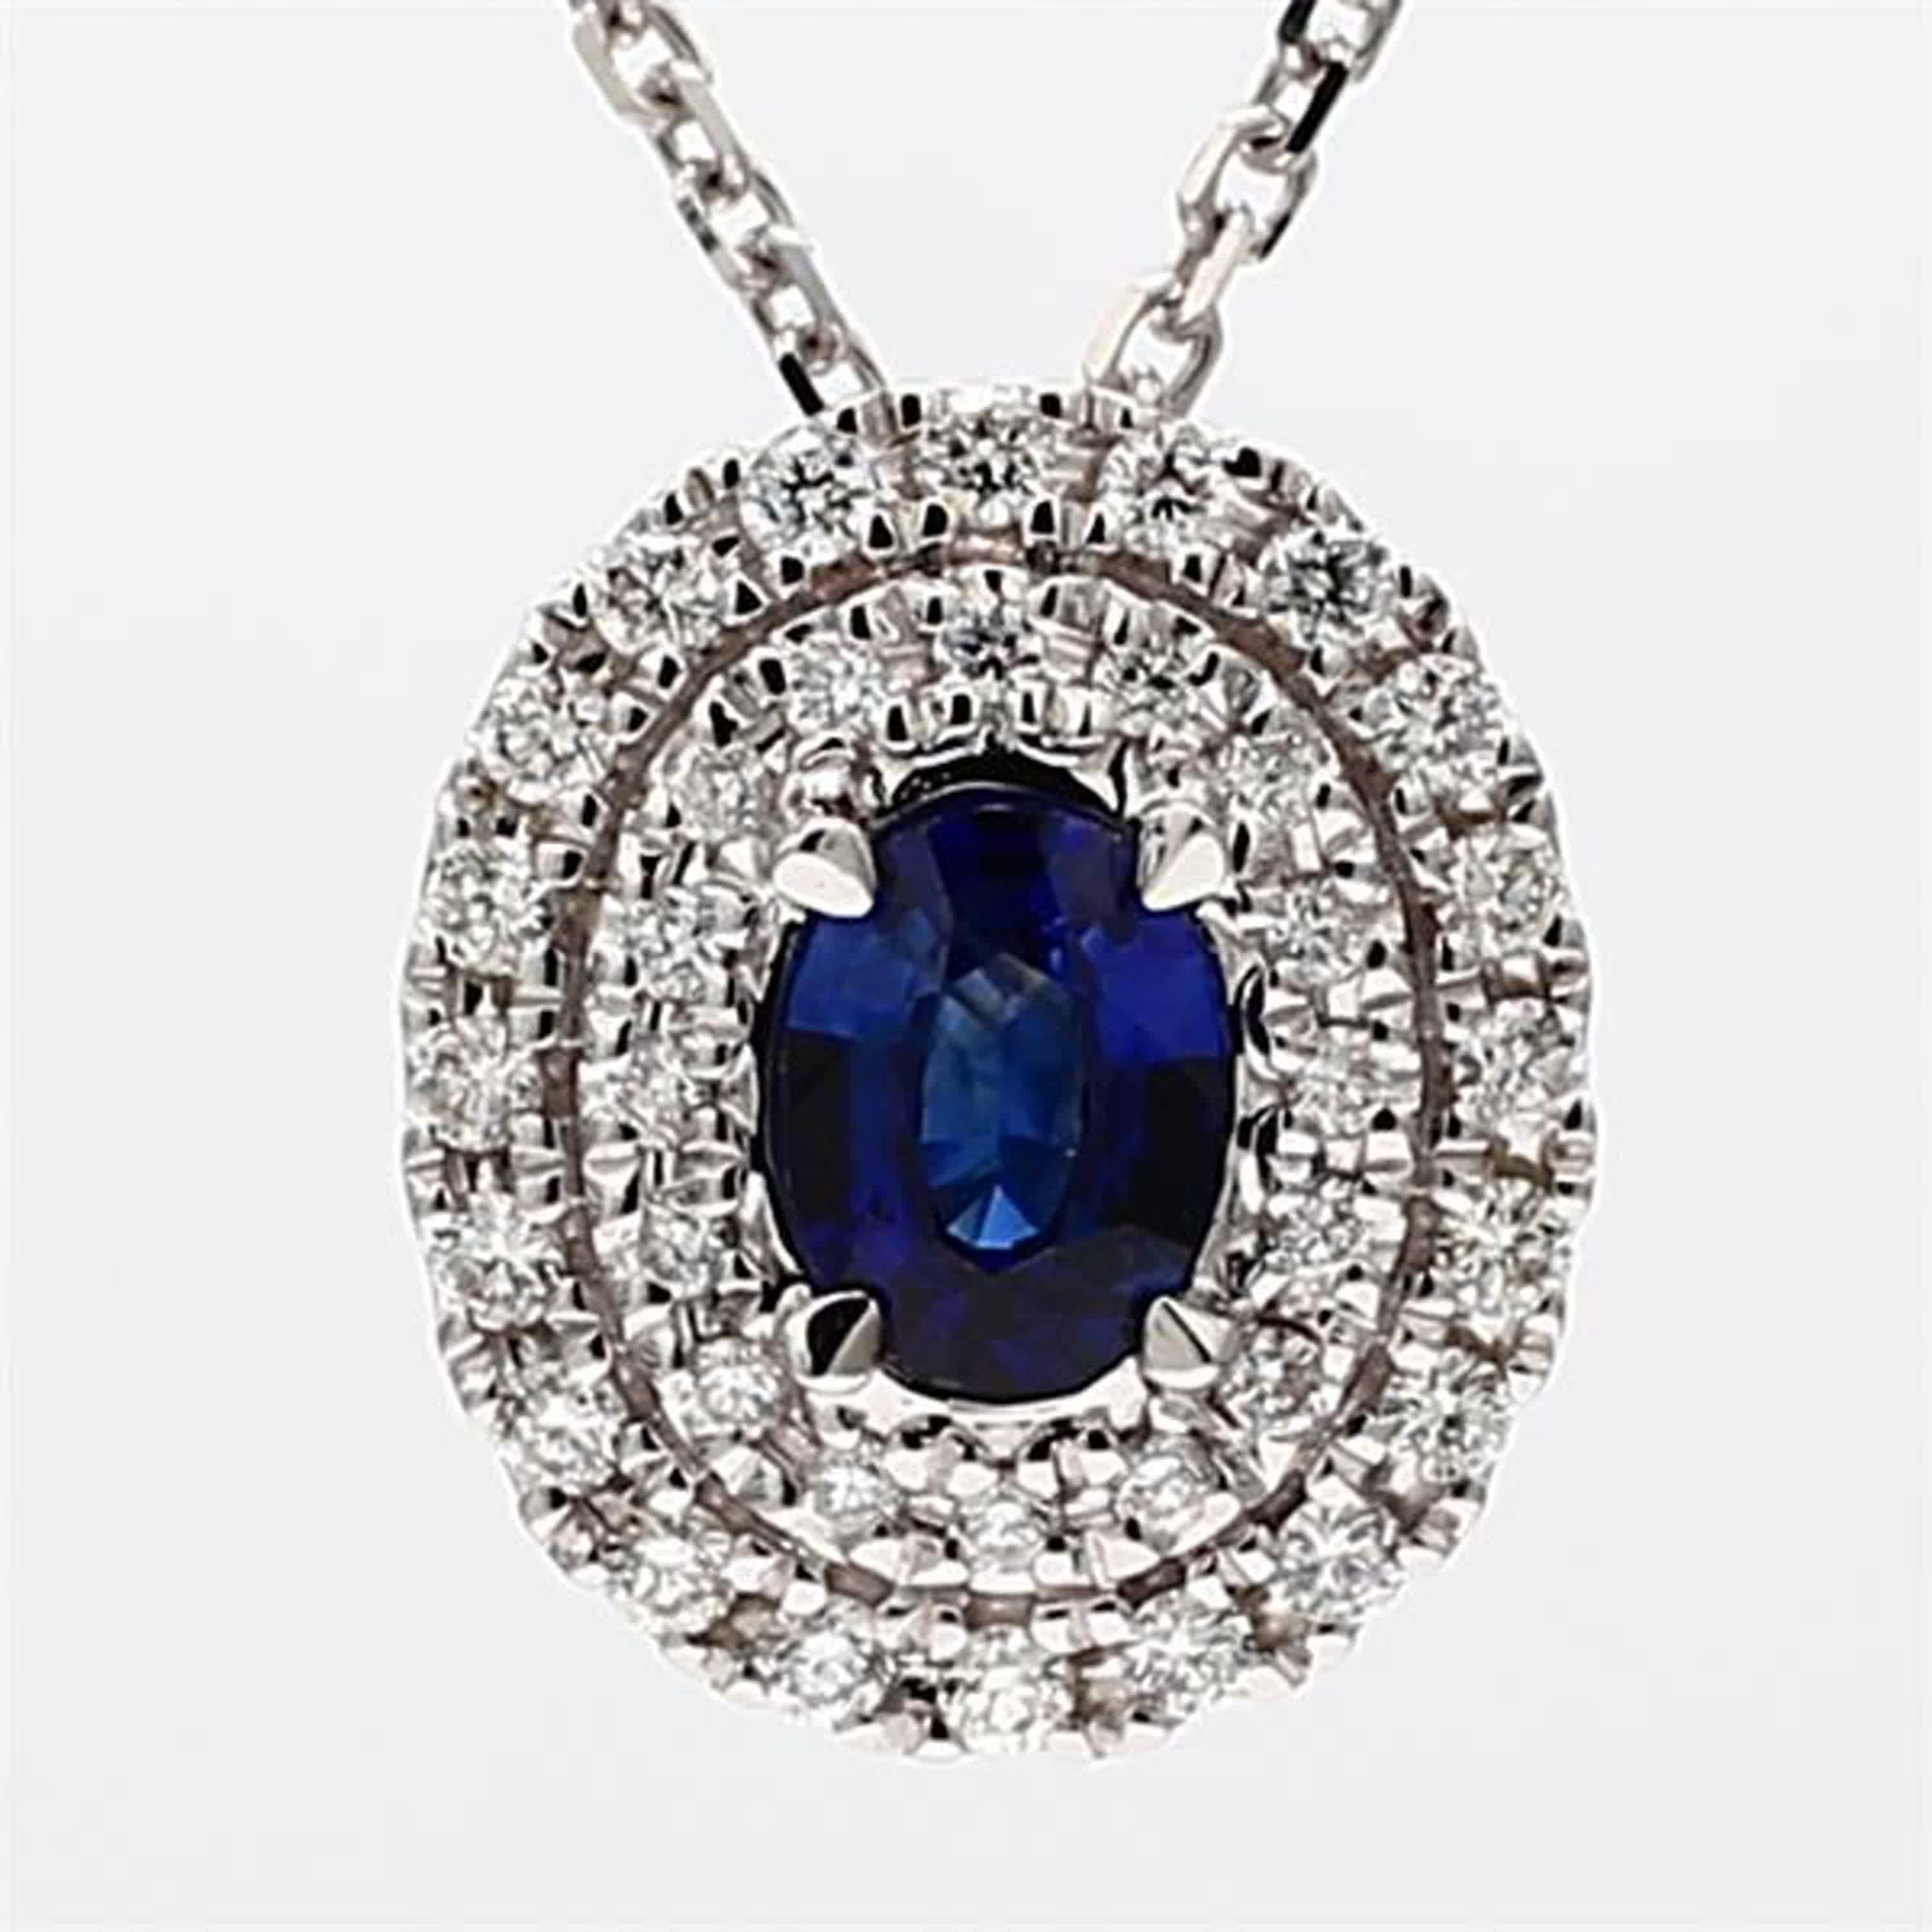 RareGemWorld's classic sapphire pendant. Mounted in a beautiful 18K White Gold setting with a natural oval cut blue sapphire. The sapphire is surrounded by natural round white diamond melee. This pendant is guaranteed to impress and enhance your